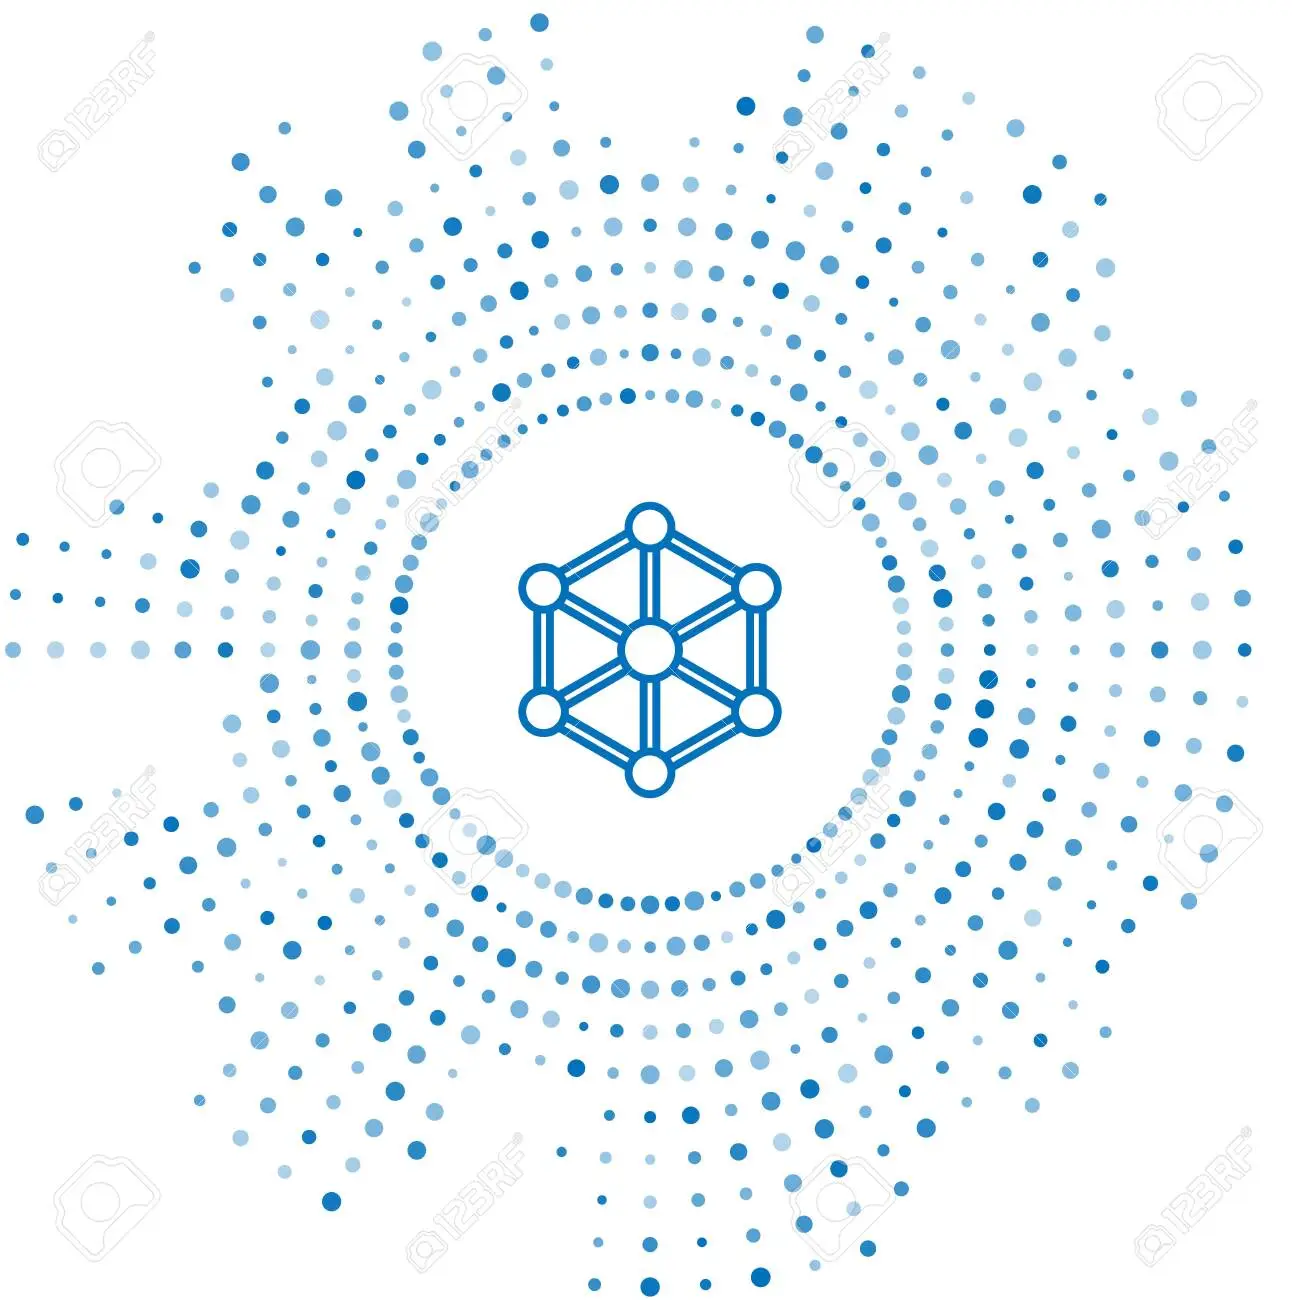 https://excel-accountancy.com/wp-content/uploads/2023/03/129701150-blue-line-blockchain-technology-icon-isolated-on-white-background-cryptocurrency-data-abstract.webp